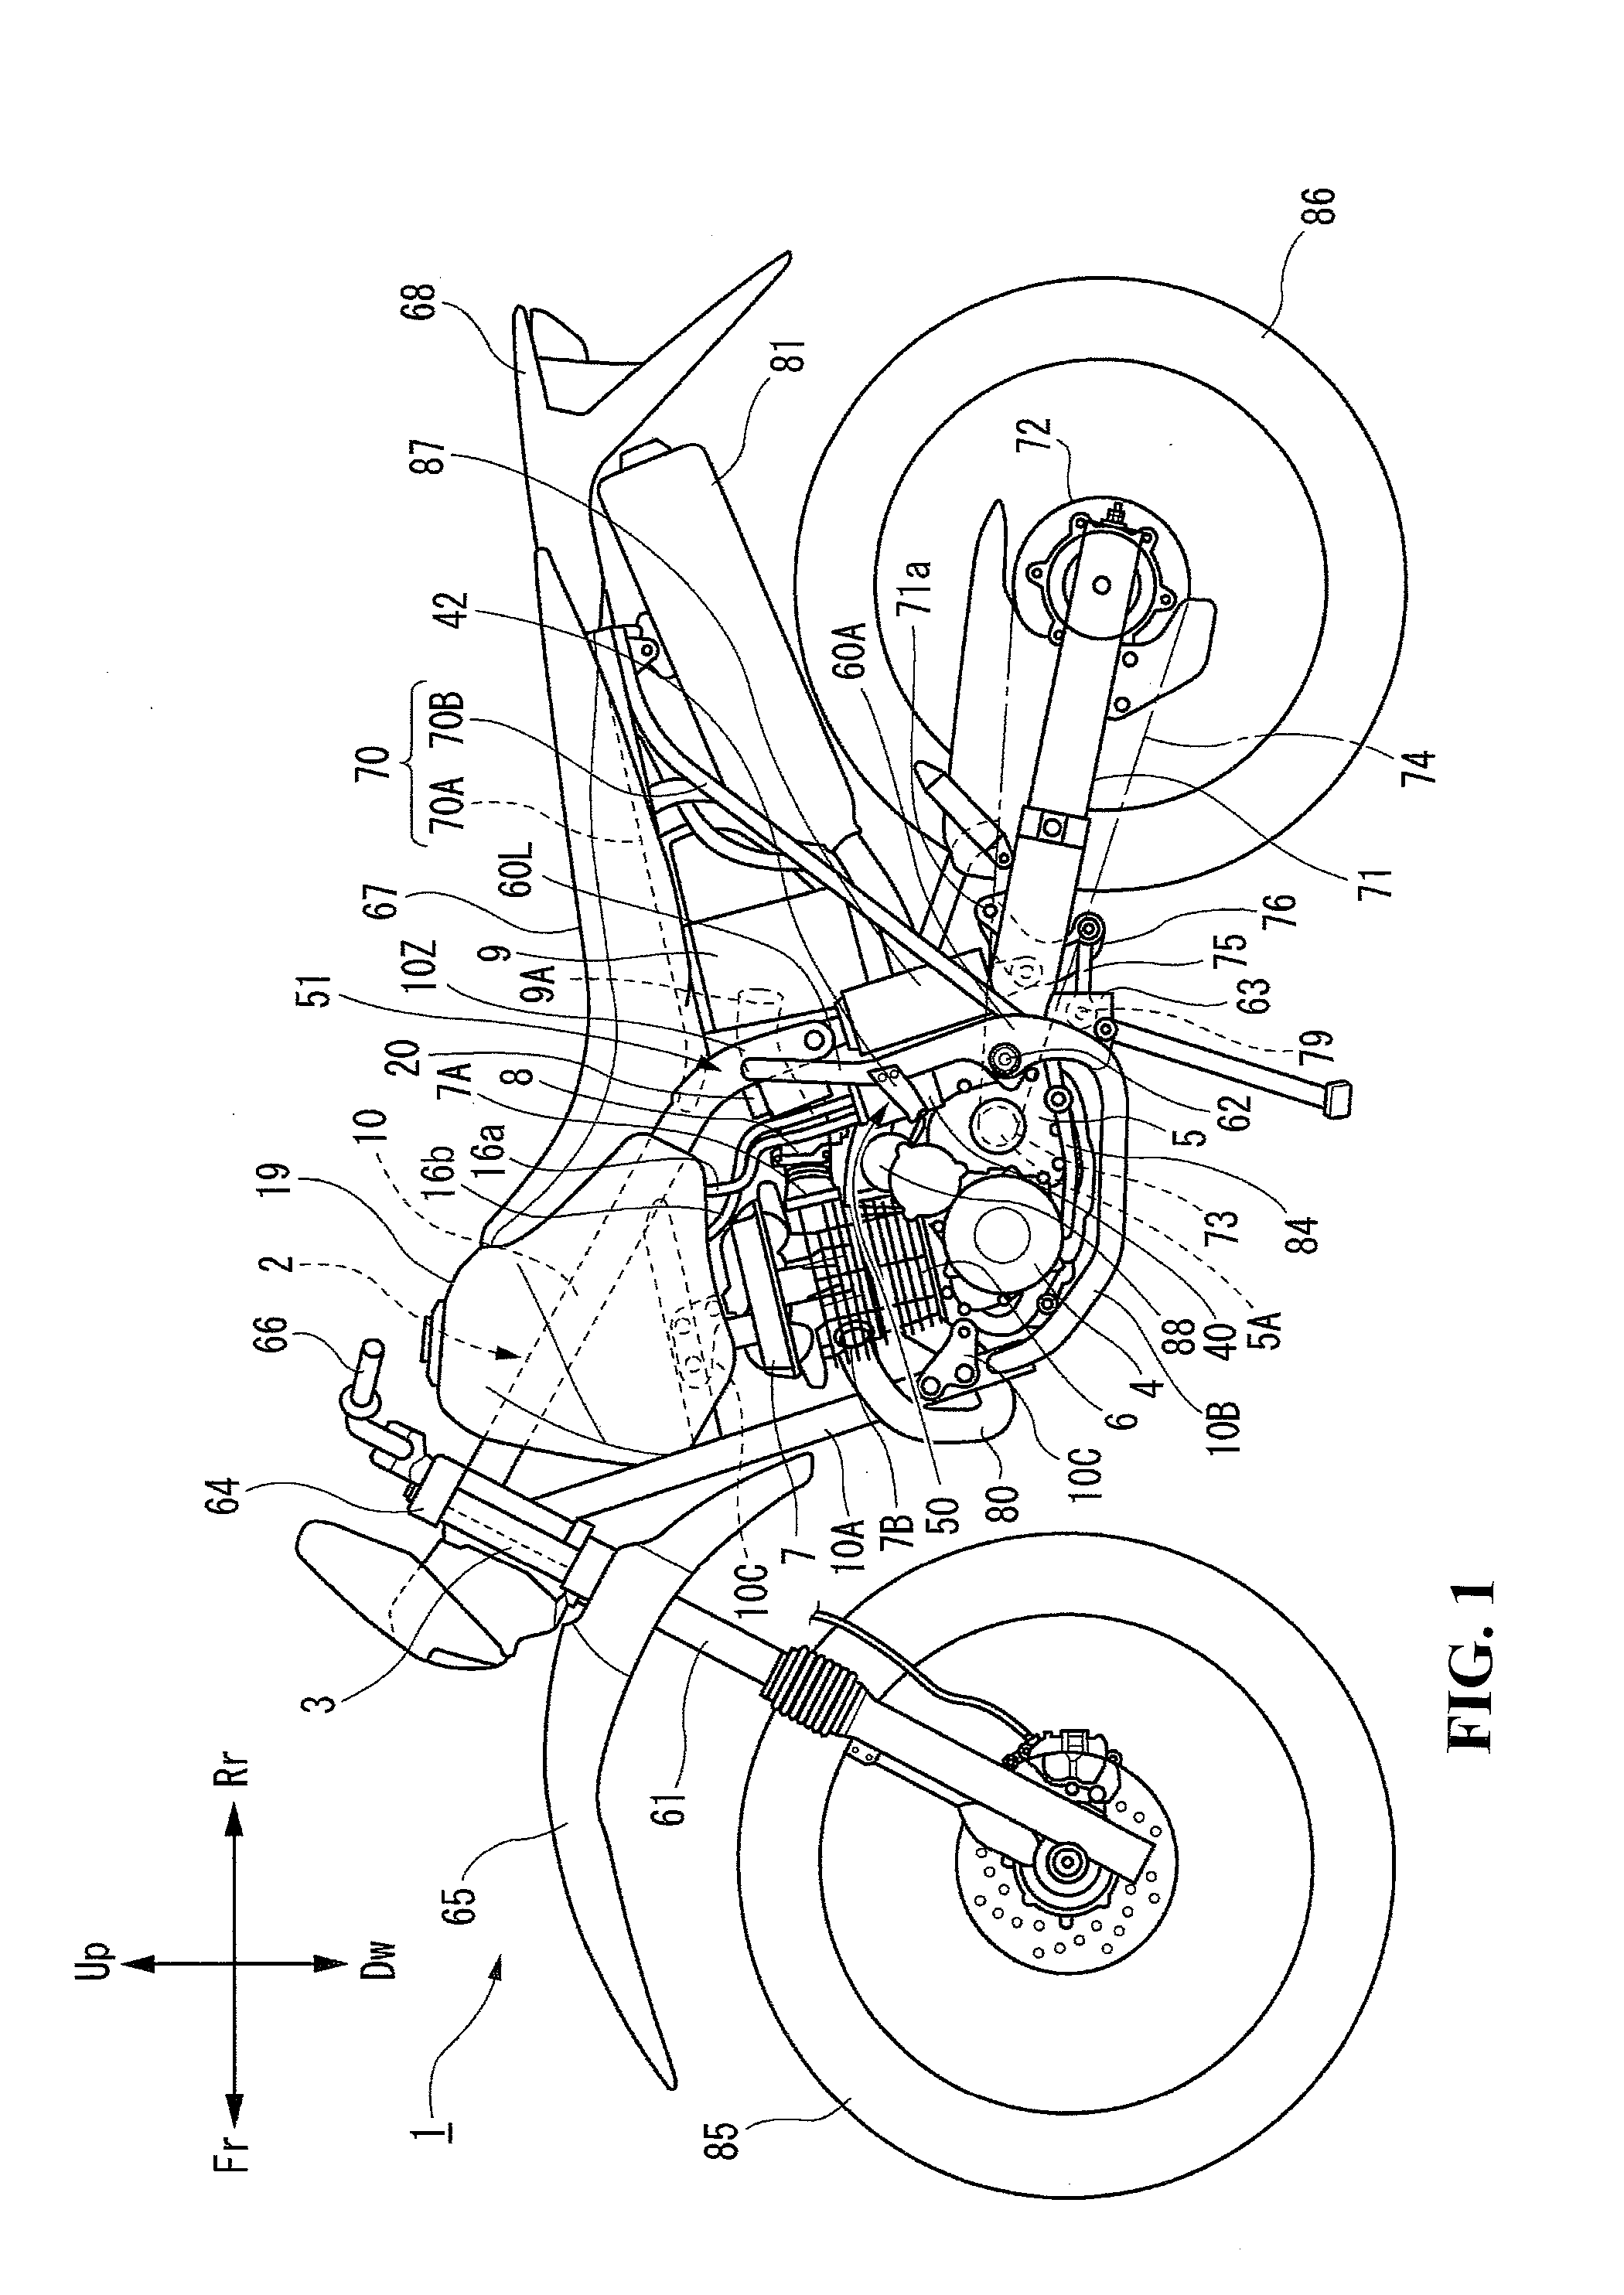 Fuel supply structure of saddle-ride type vehicle